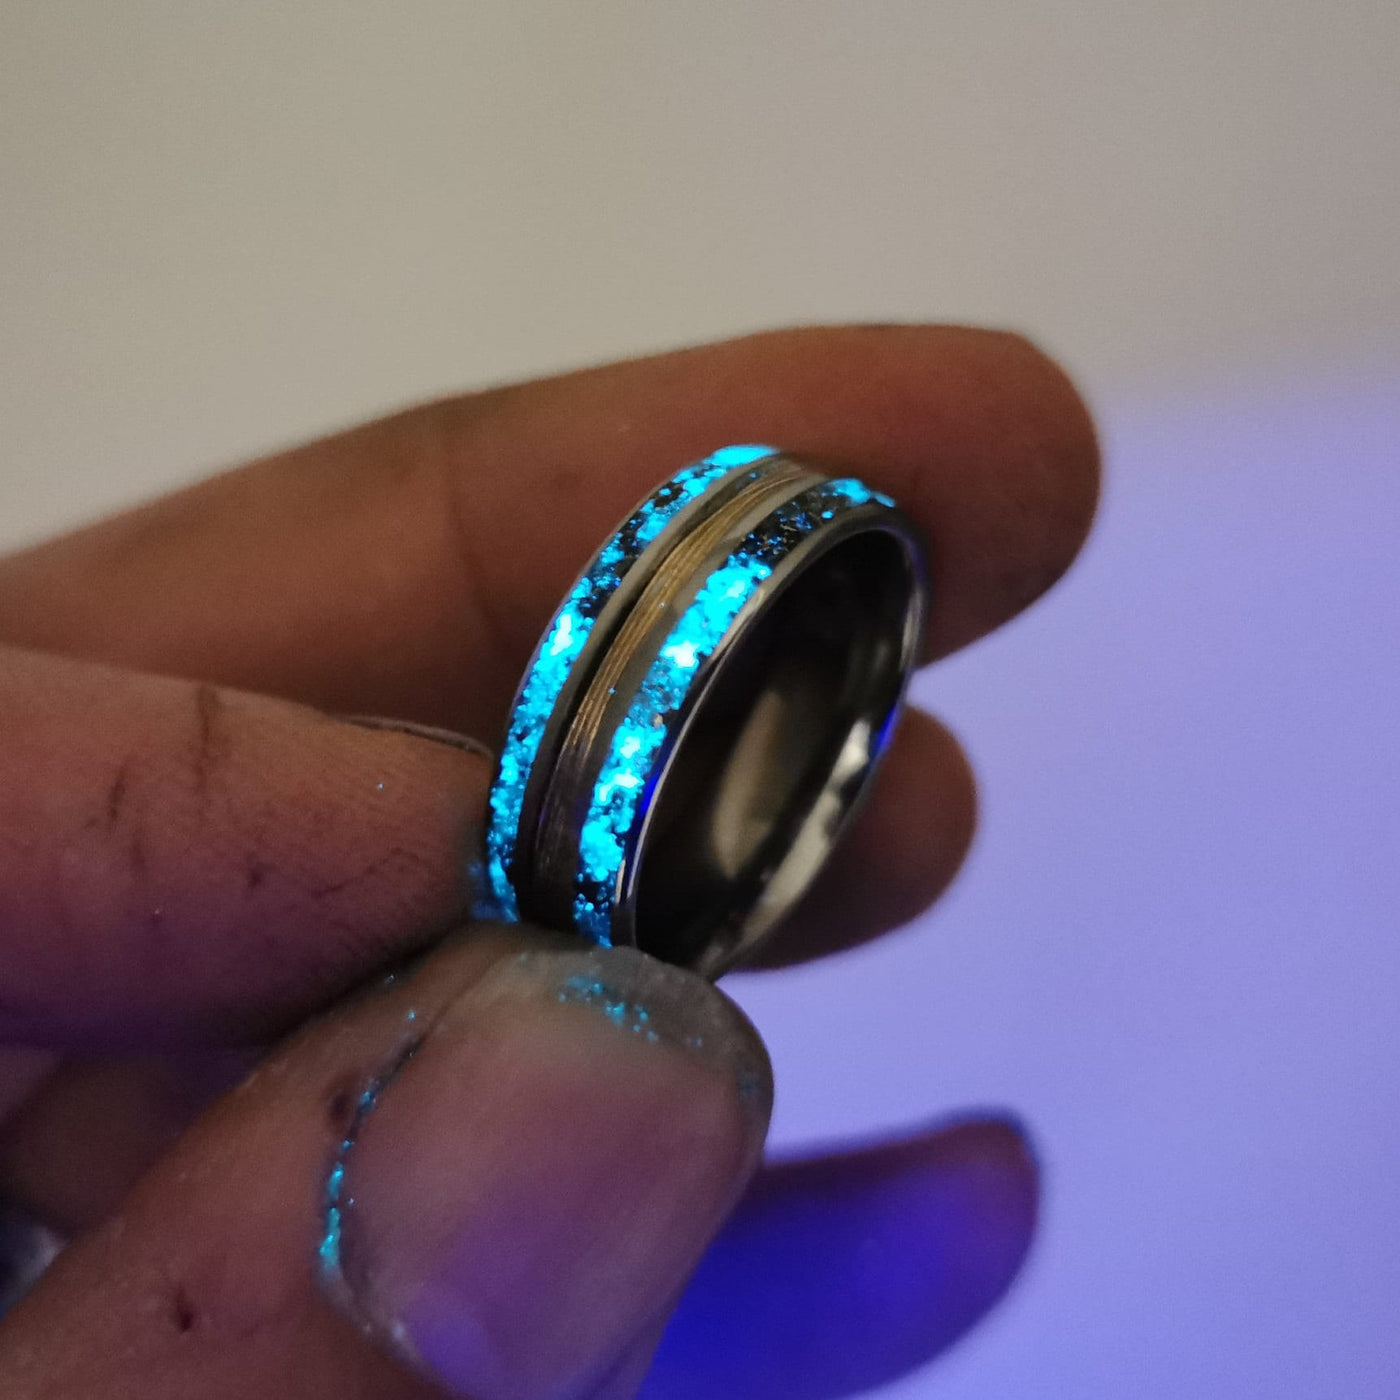 Gold wire ring, meteoriet ring, Glow in the dark ring, male engagement ring, glowstone ring, mens wedding band, tungsten ring. glow ring.